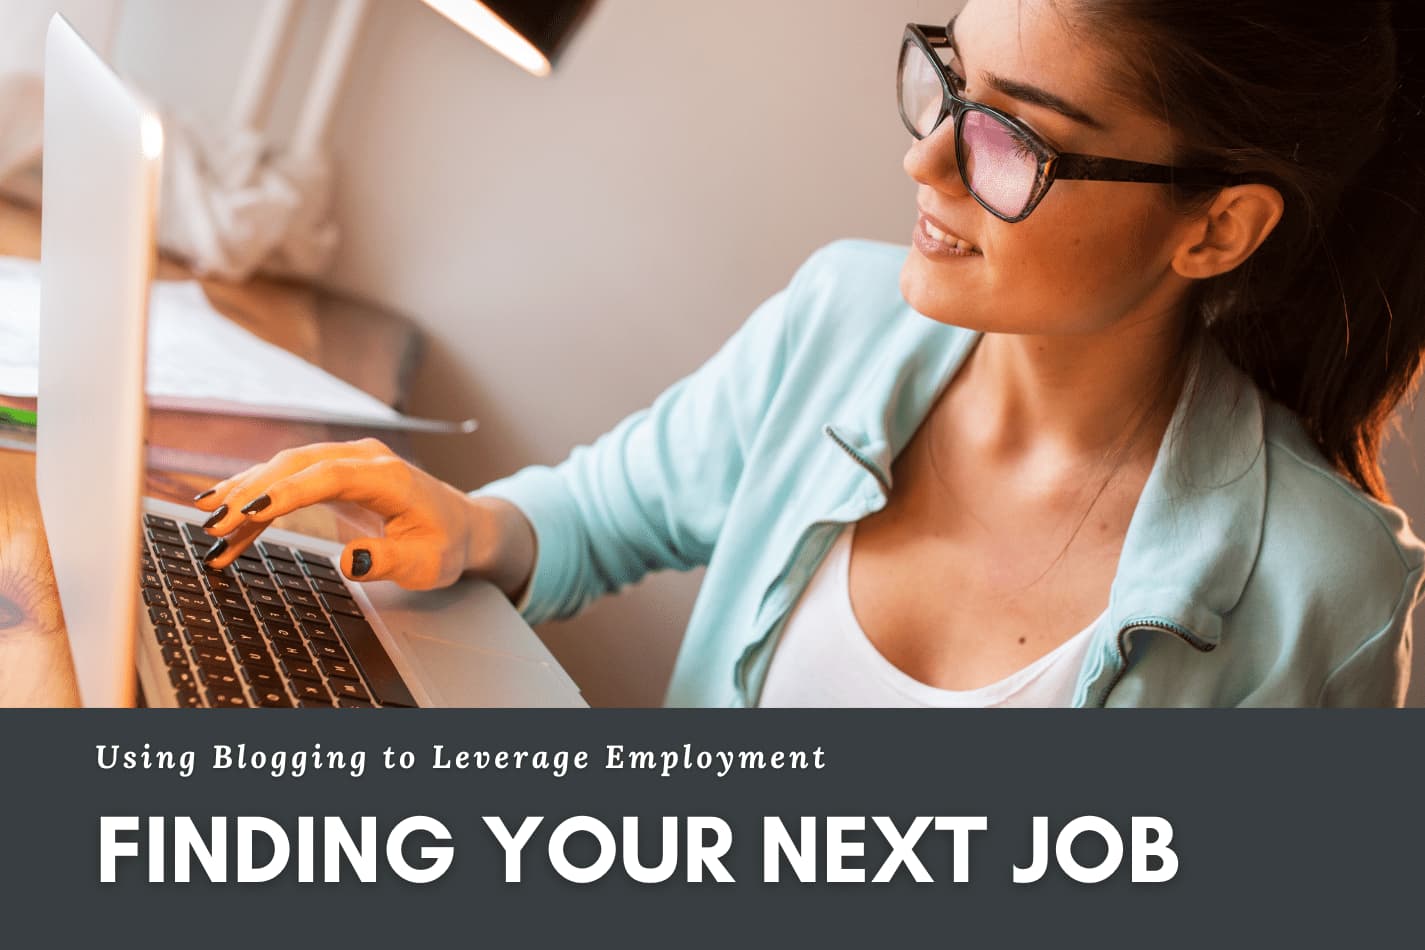 Why Blogging is One of the Best Tools for Finding a Job